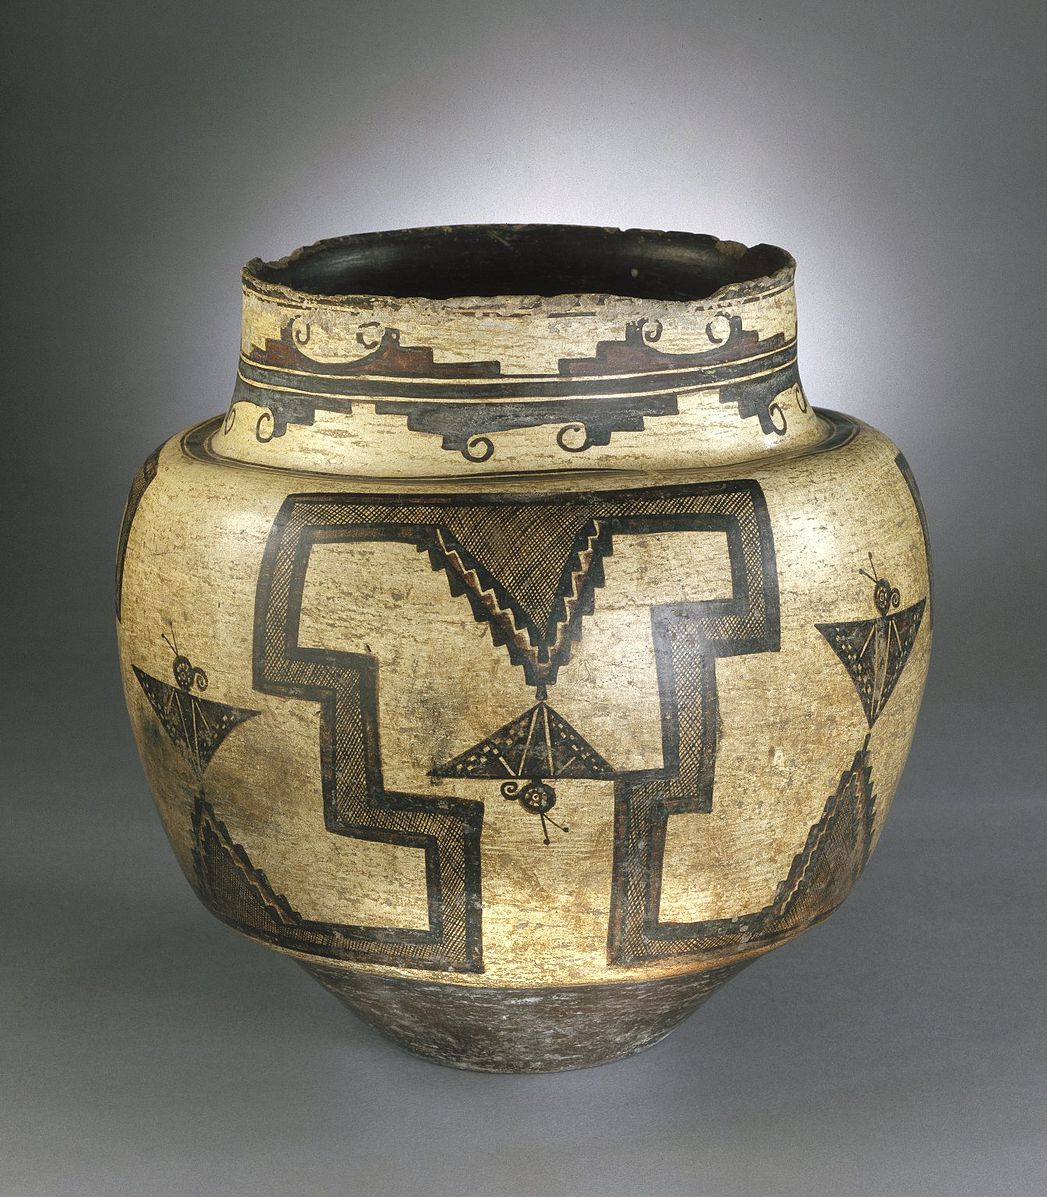 A water pot made of clay and painted with pigments in geometric designs